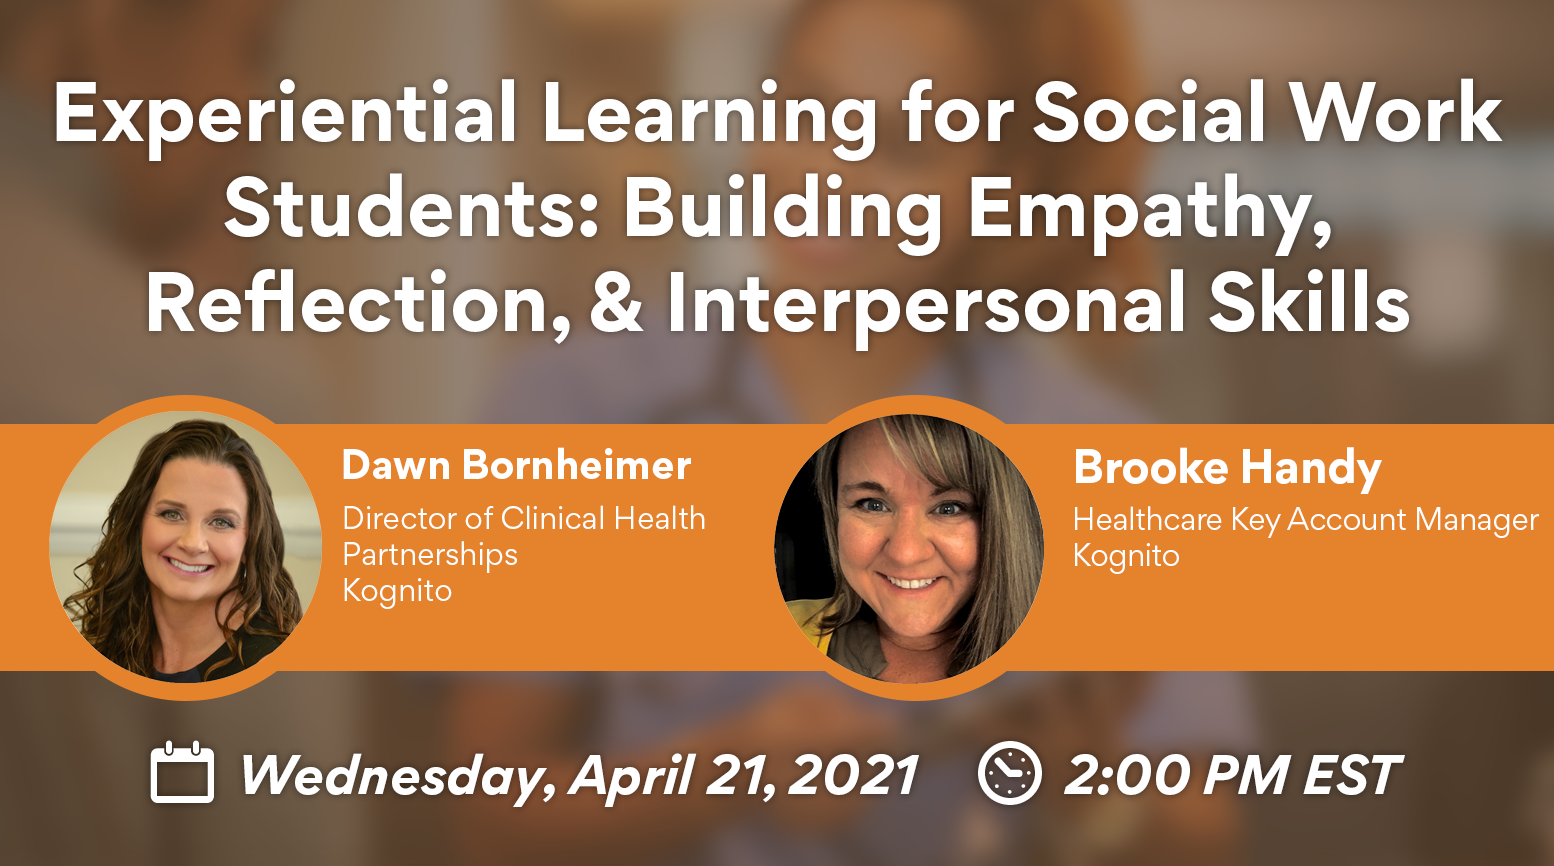 Experiential Learning for Social Work Students: Building Empathy, Reflection, & Interpersonal Skills